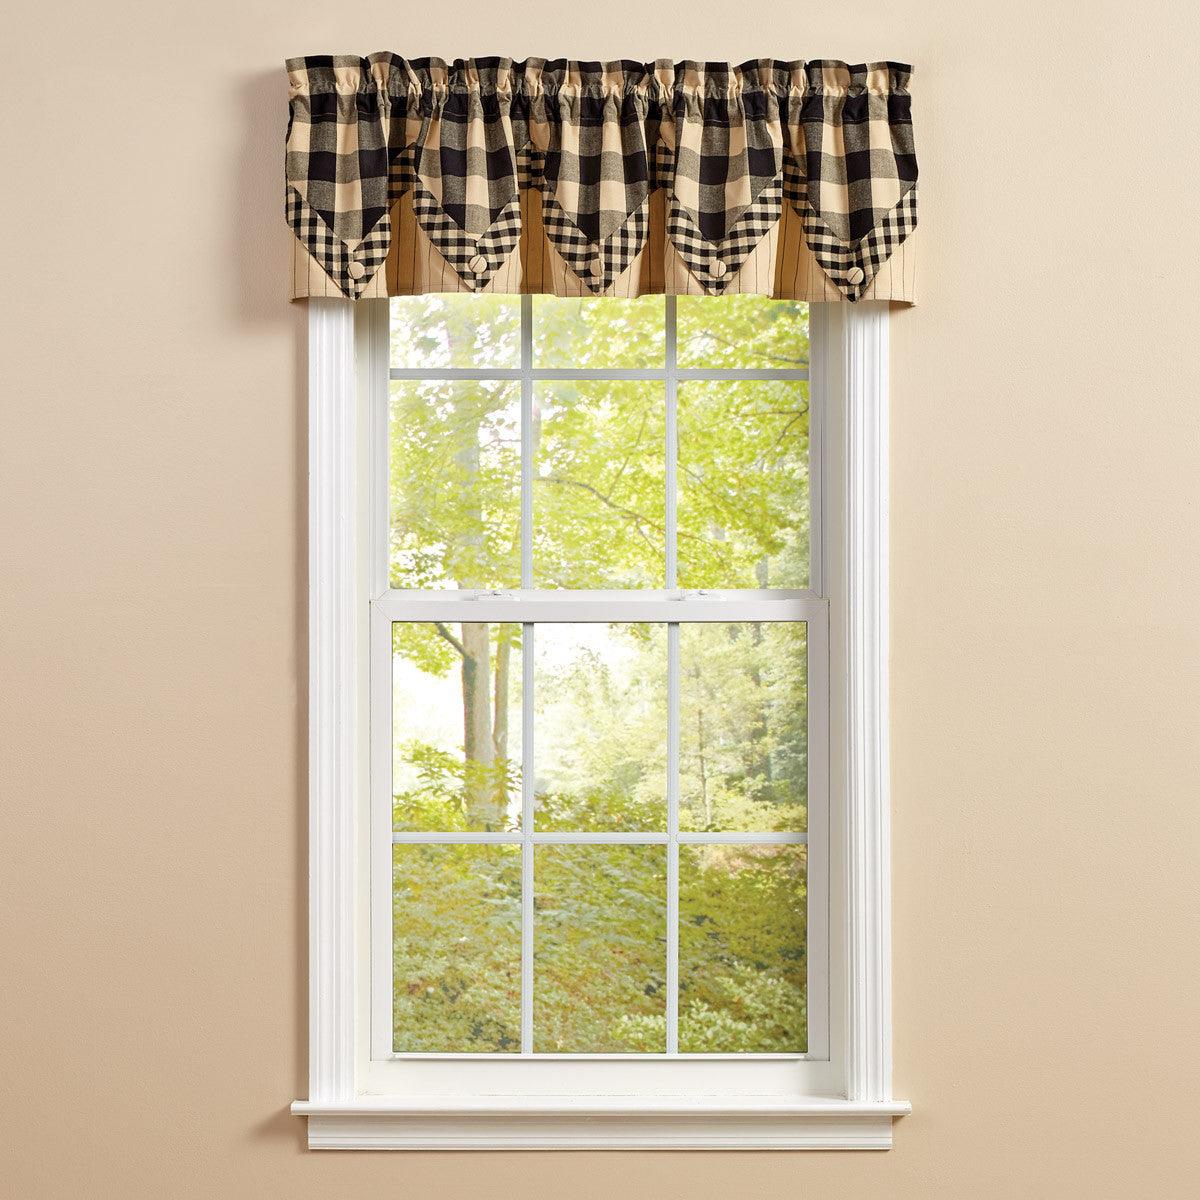 Wicklow Lined Point Valance 15" L - Black Park designs - The Fox Decor